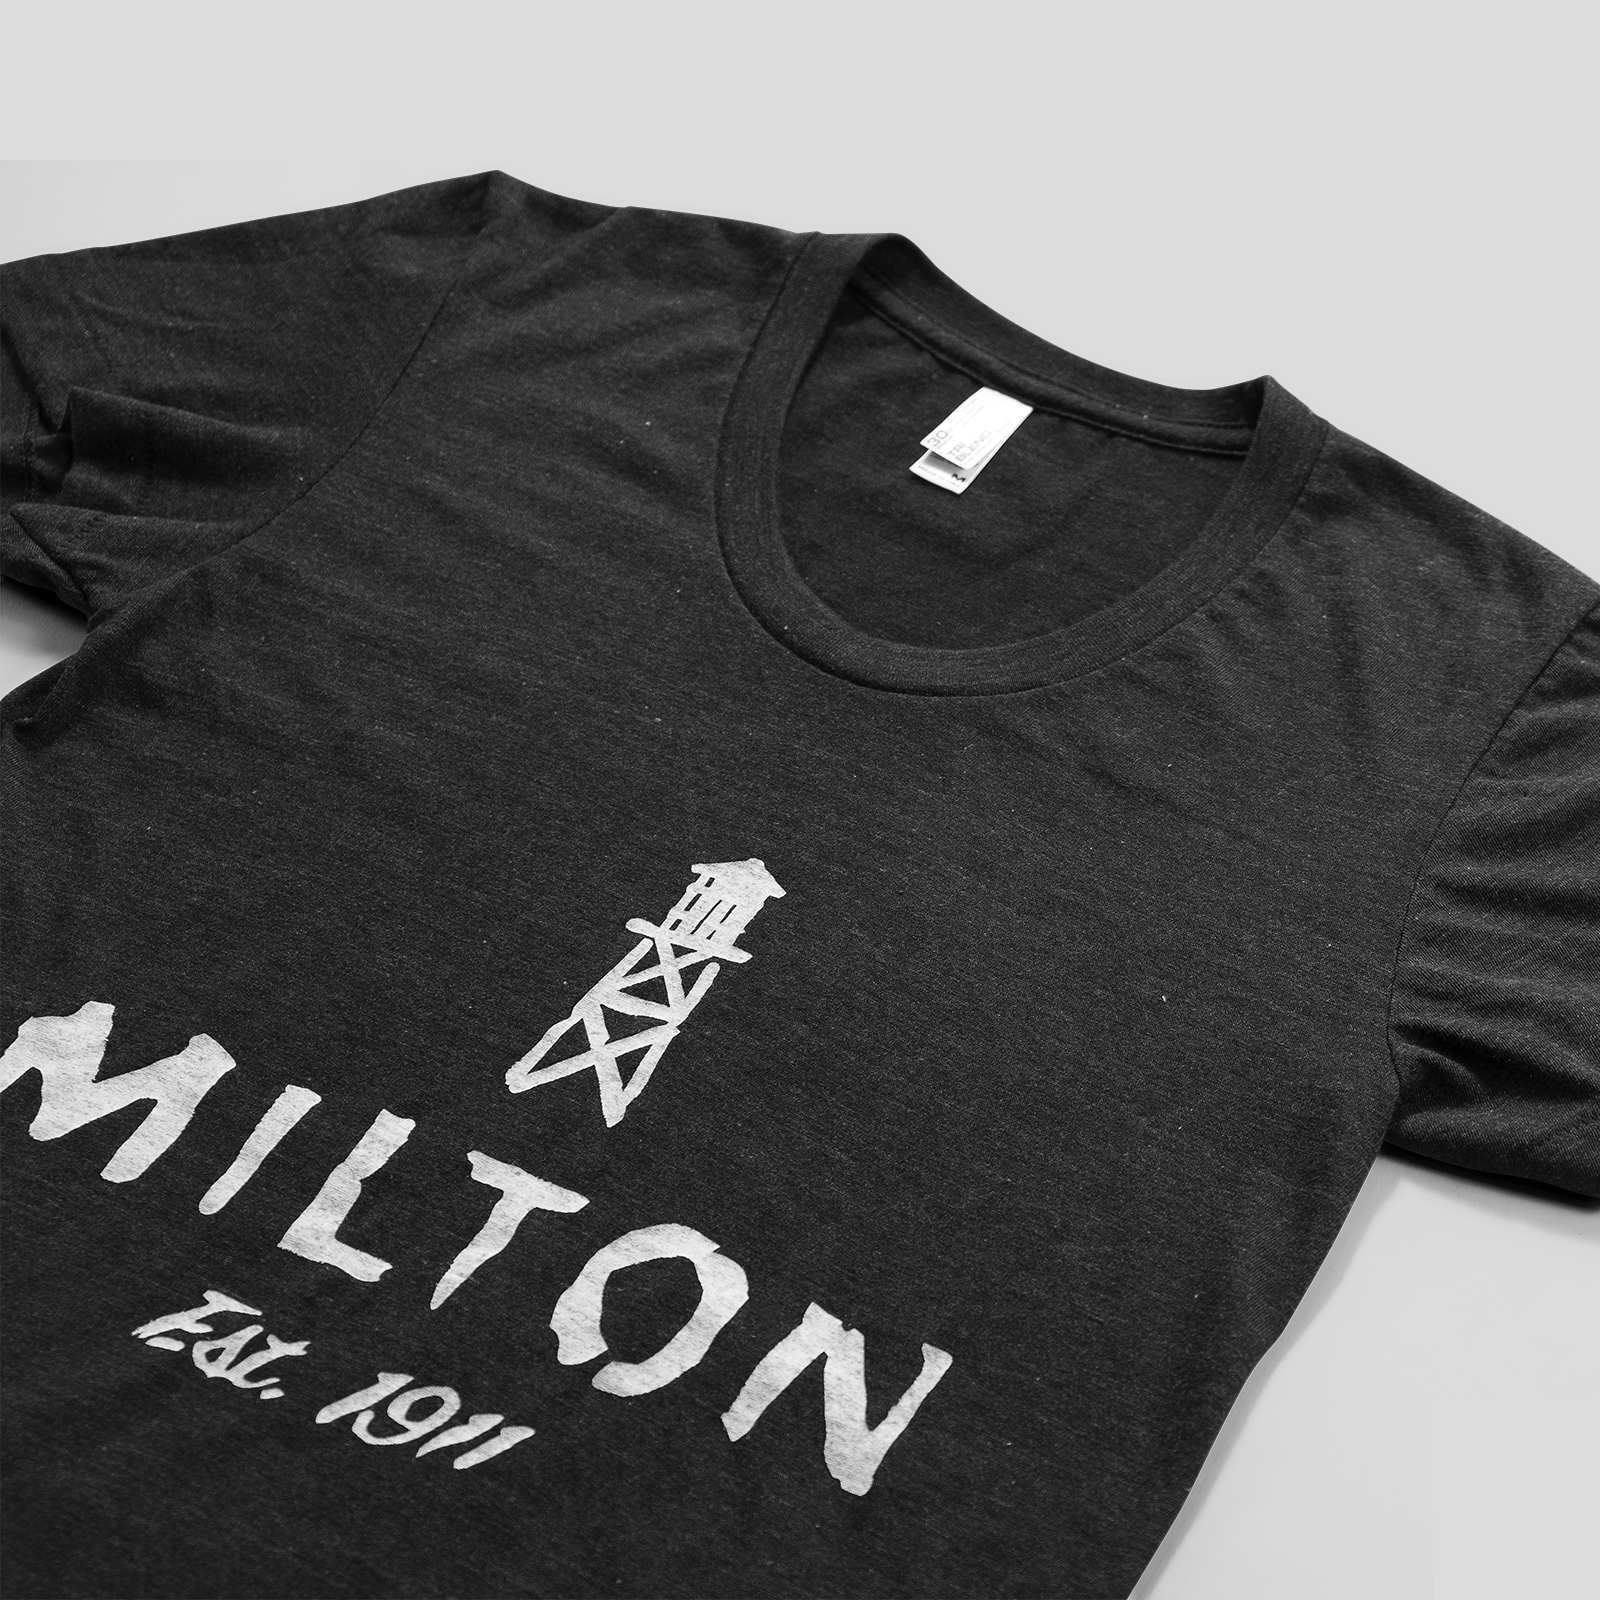 Town of Milton t-shirt for women view from side